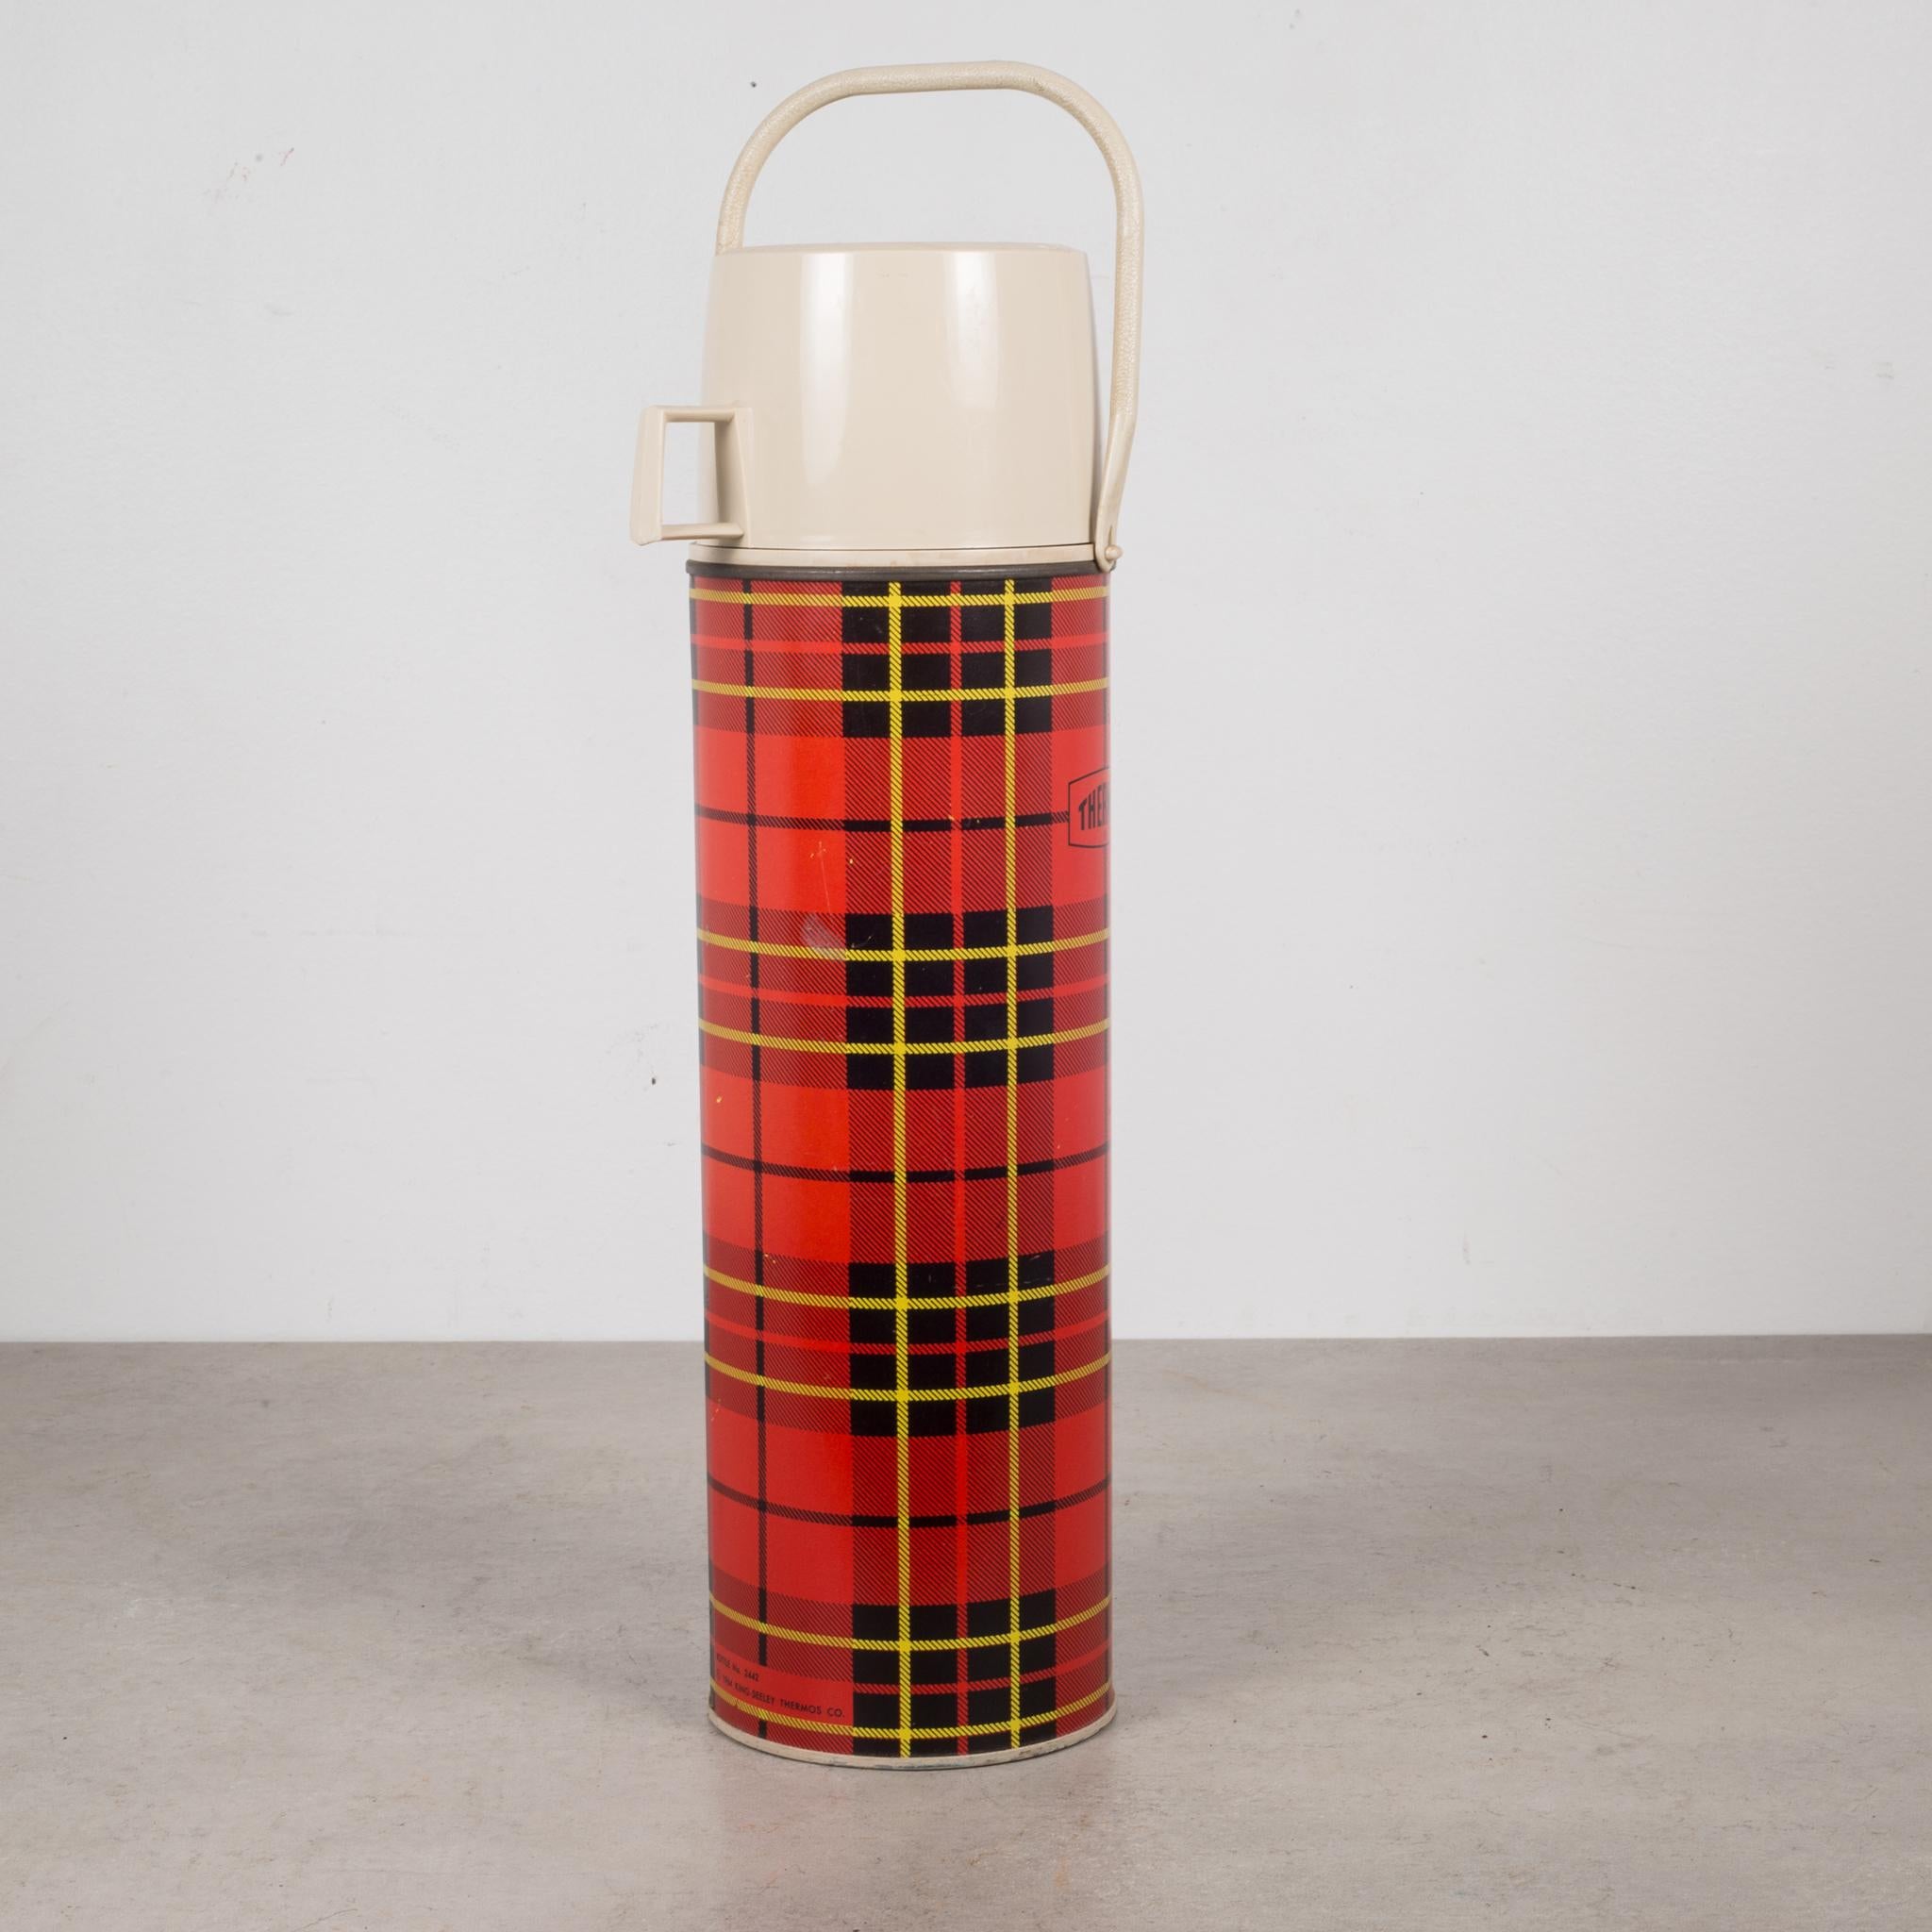 About

A vintage plaid metal thermos with glass interior and plastic cup top. The glass interior is intact and thermos works properly. 

Creator Thermos Co.
Date of manufacture circa 1970s.
Materials and techniques Glass, Plastic,